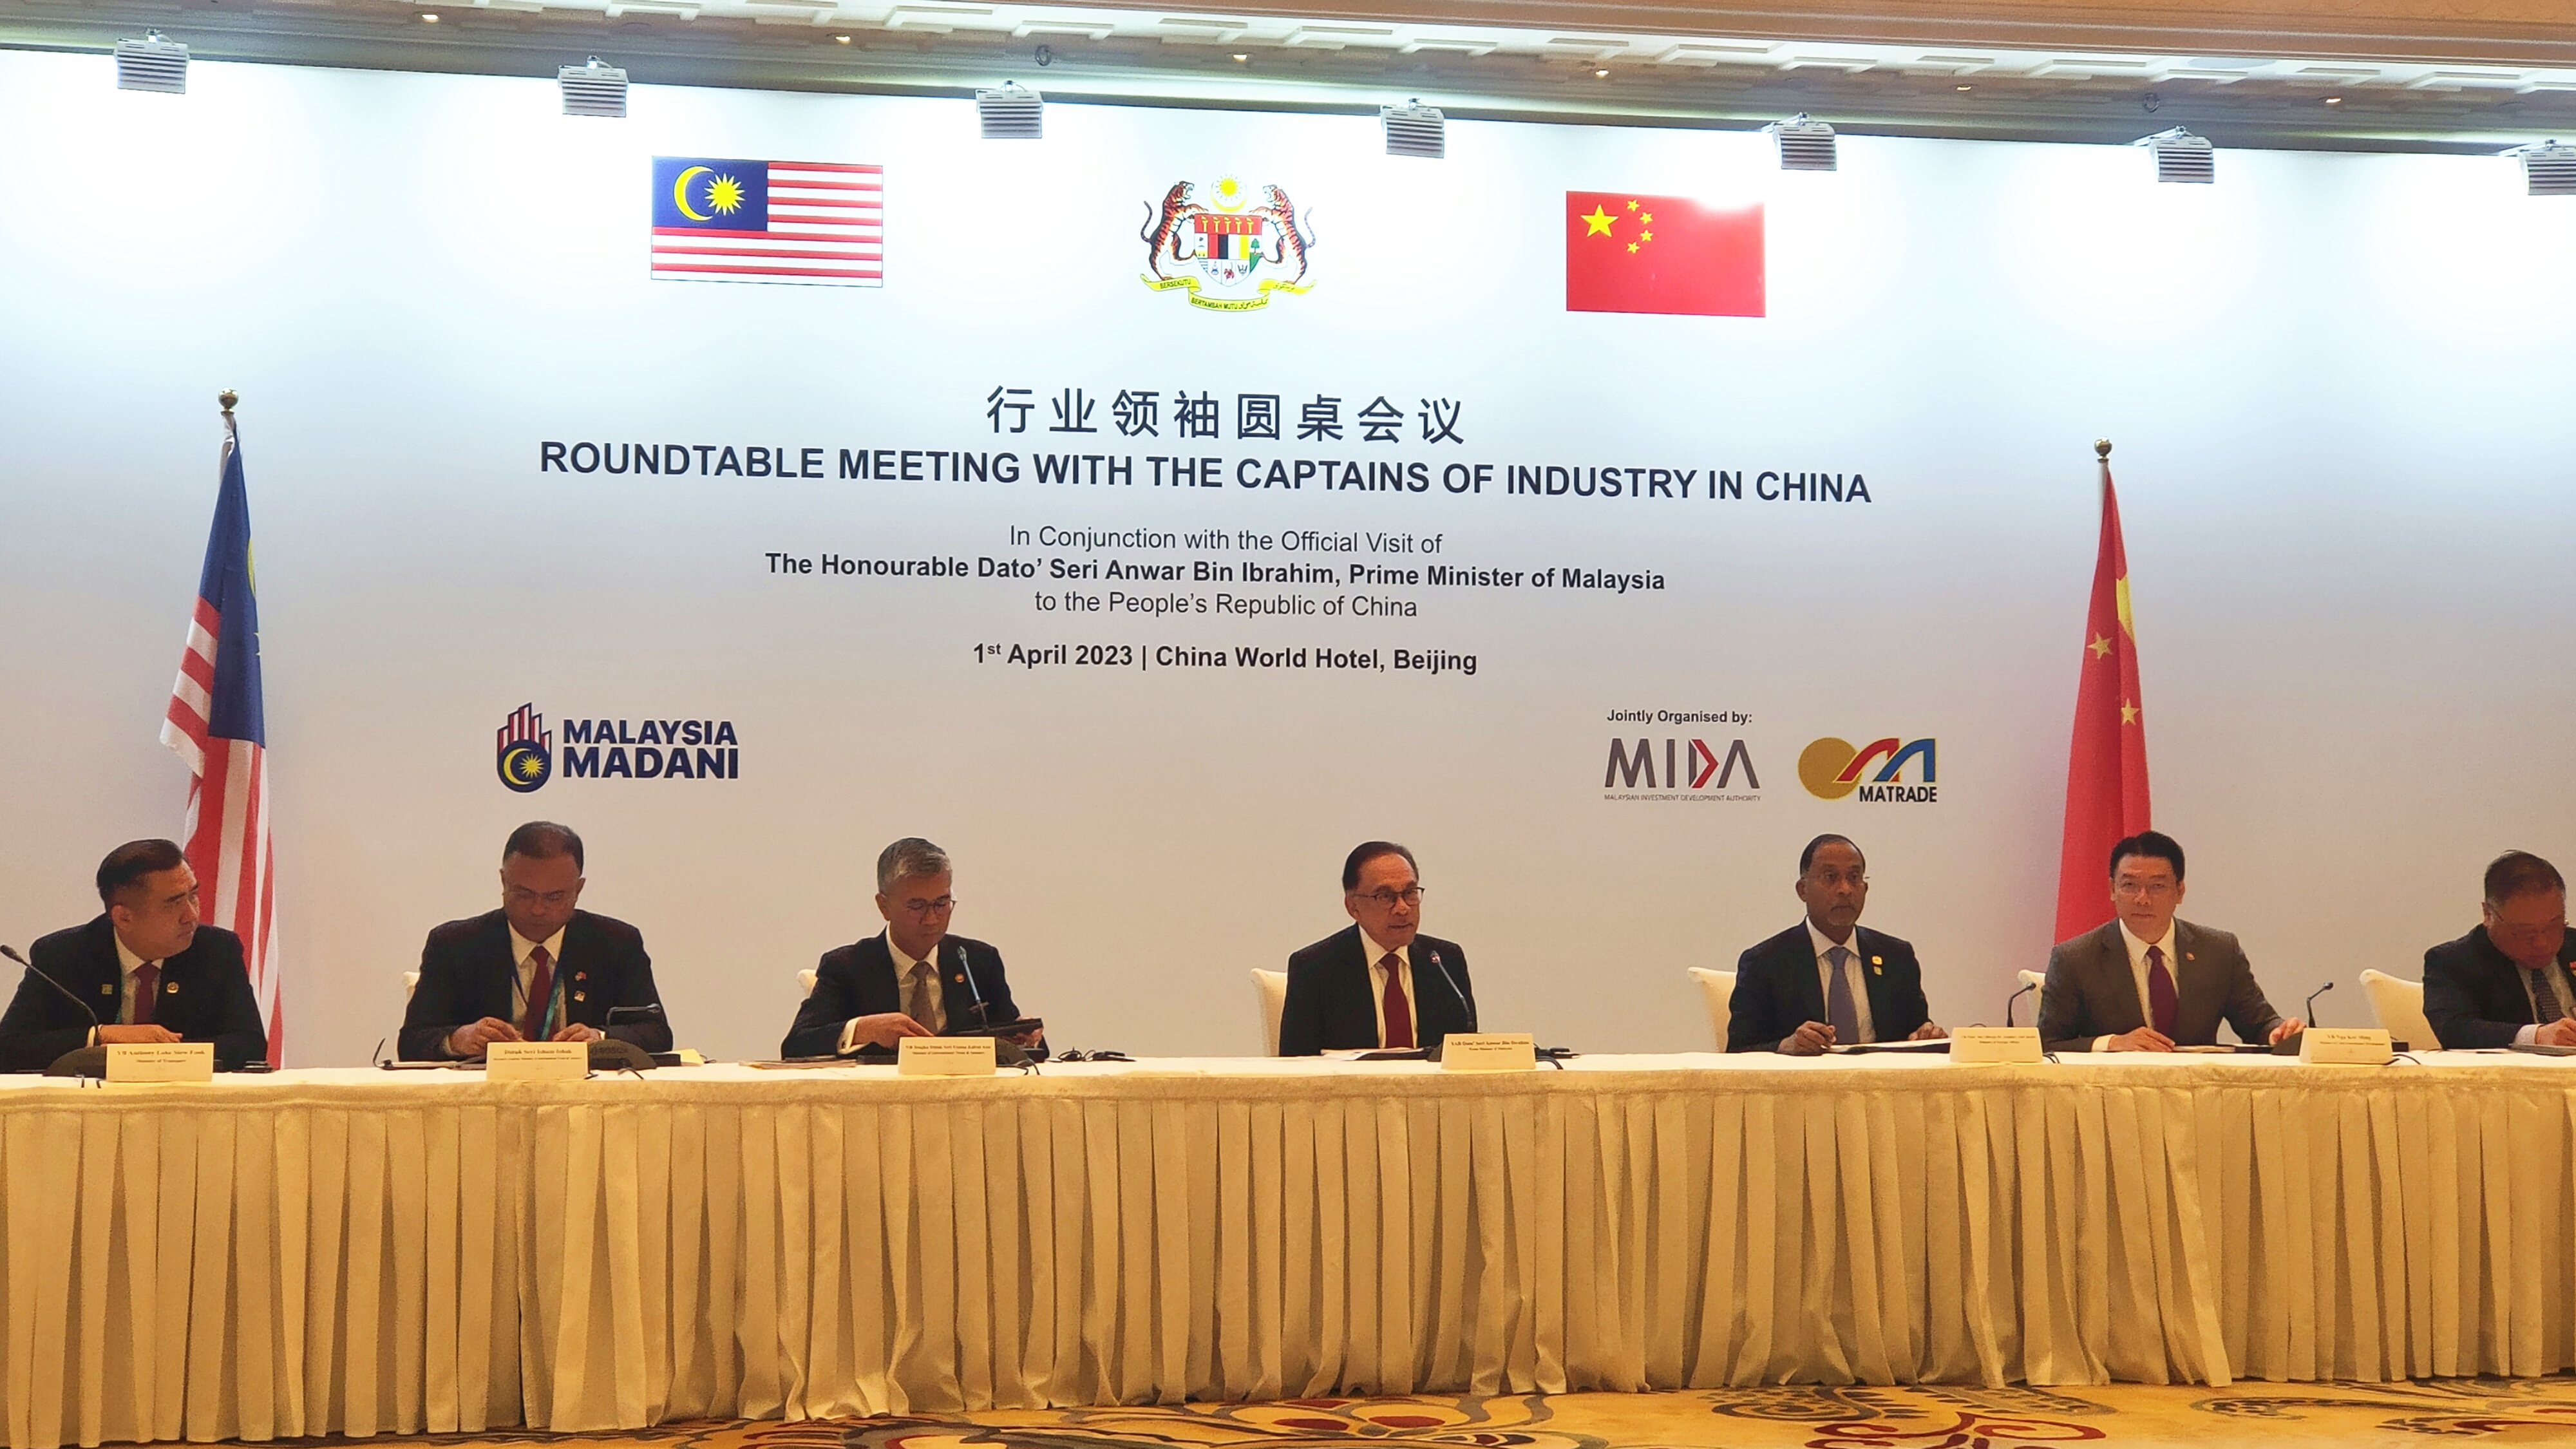 THE ROUND TABLE MEETING WITH THE RIGHT HON.PRIME MINISTER OF MALAYSIA